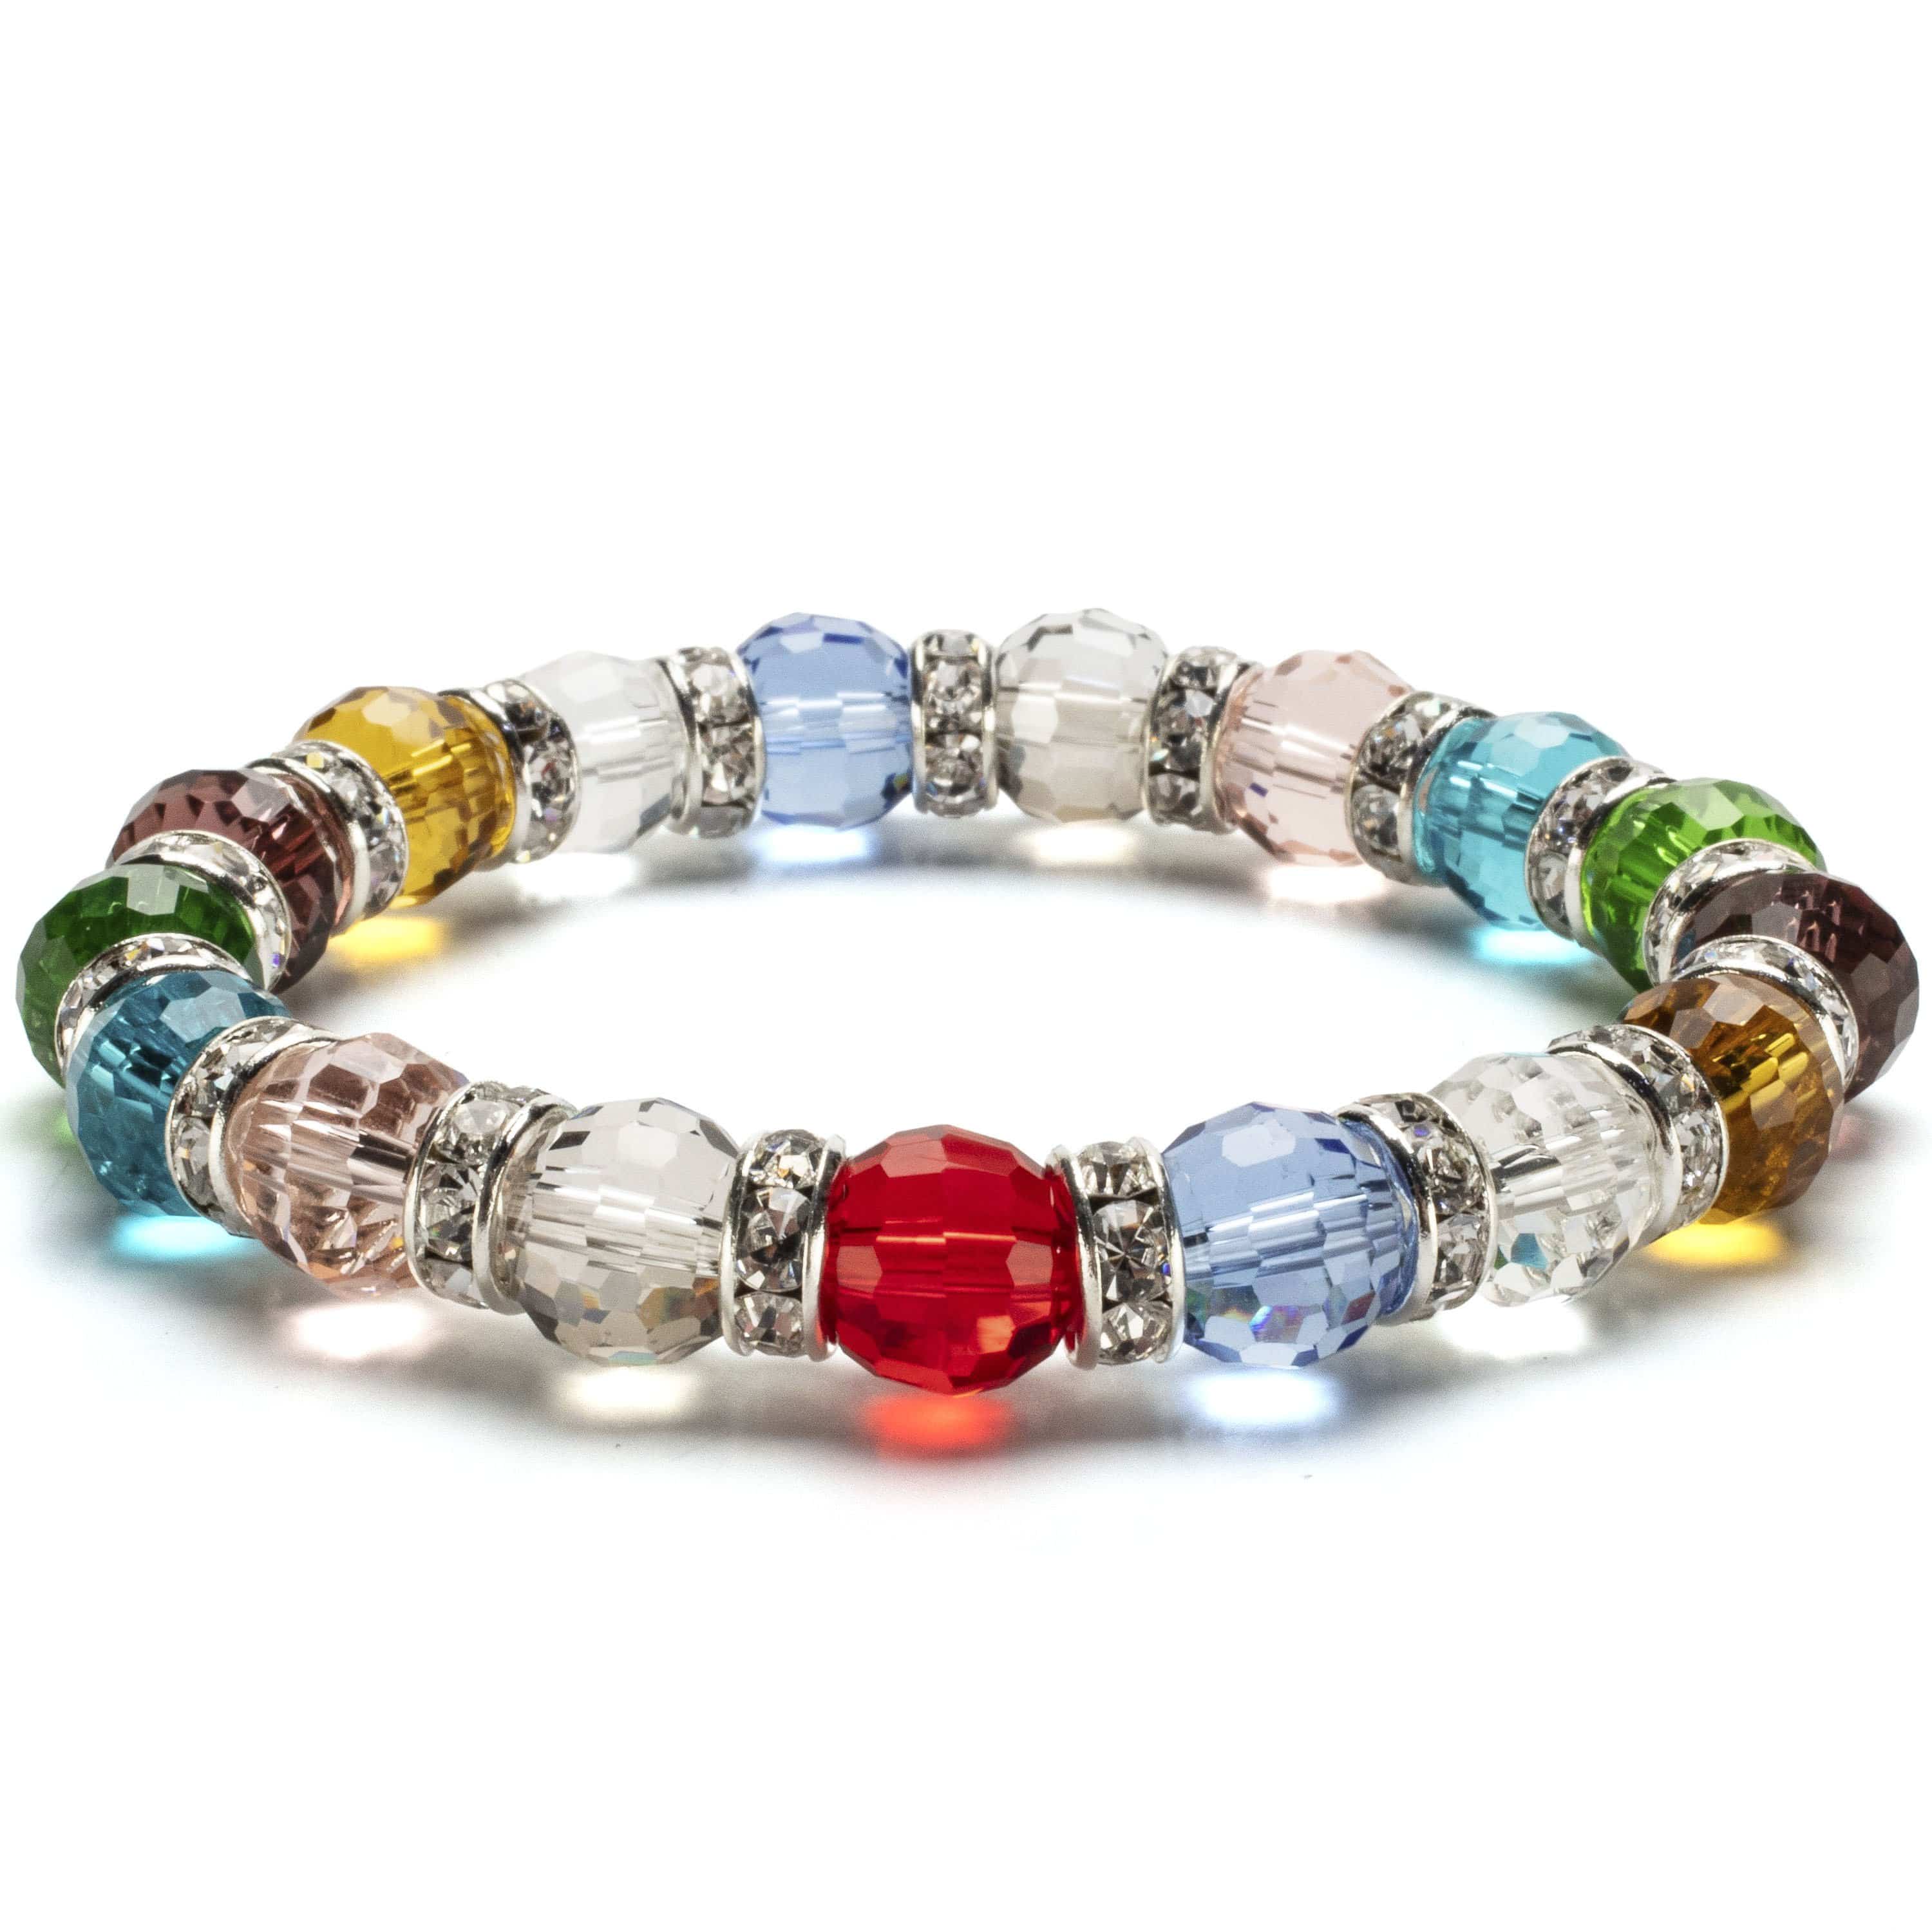 Kalifano Gorgeous Glass Jewelry Multicolored Gorgeous Glass Bracelet with Cubic Zirconia Crystals BLUE-BGG-N01